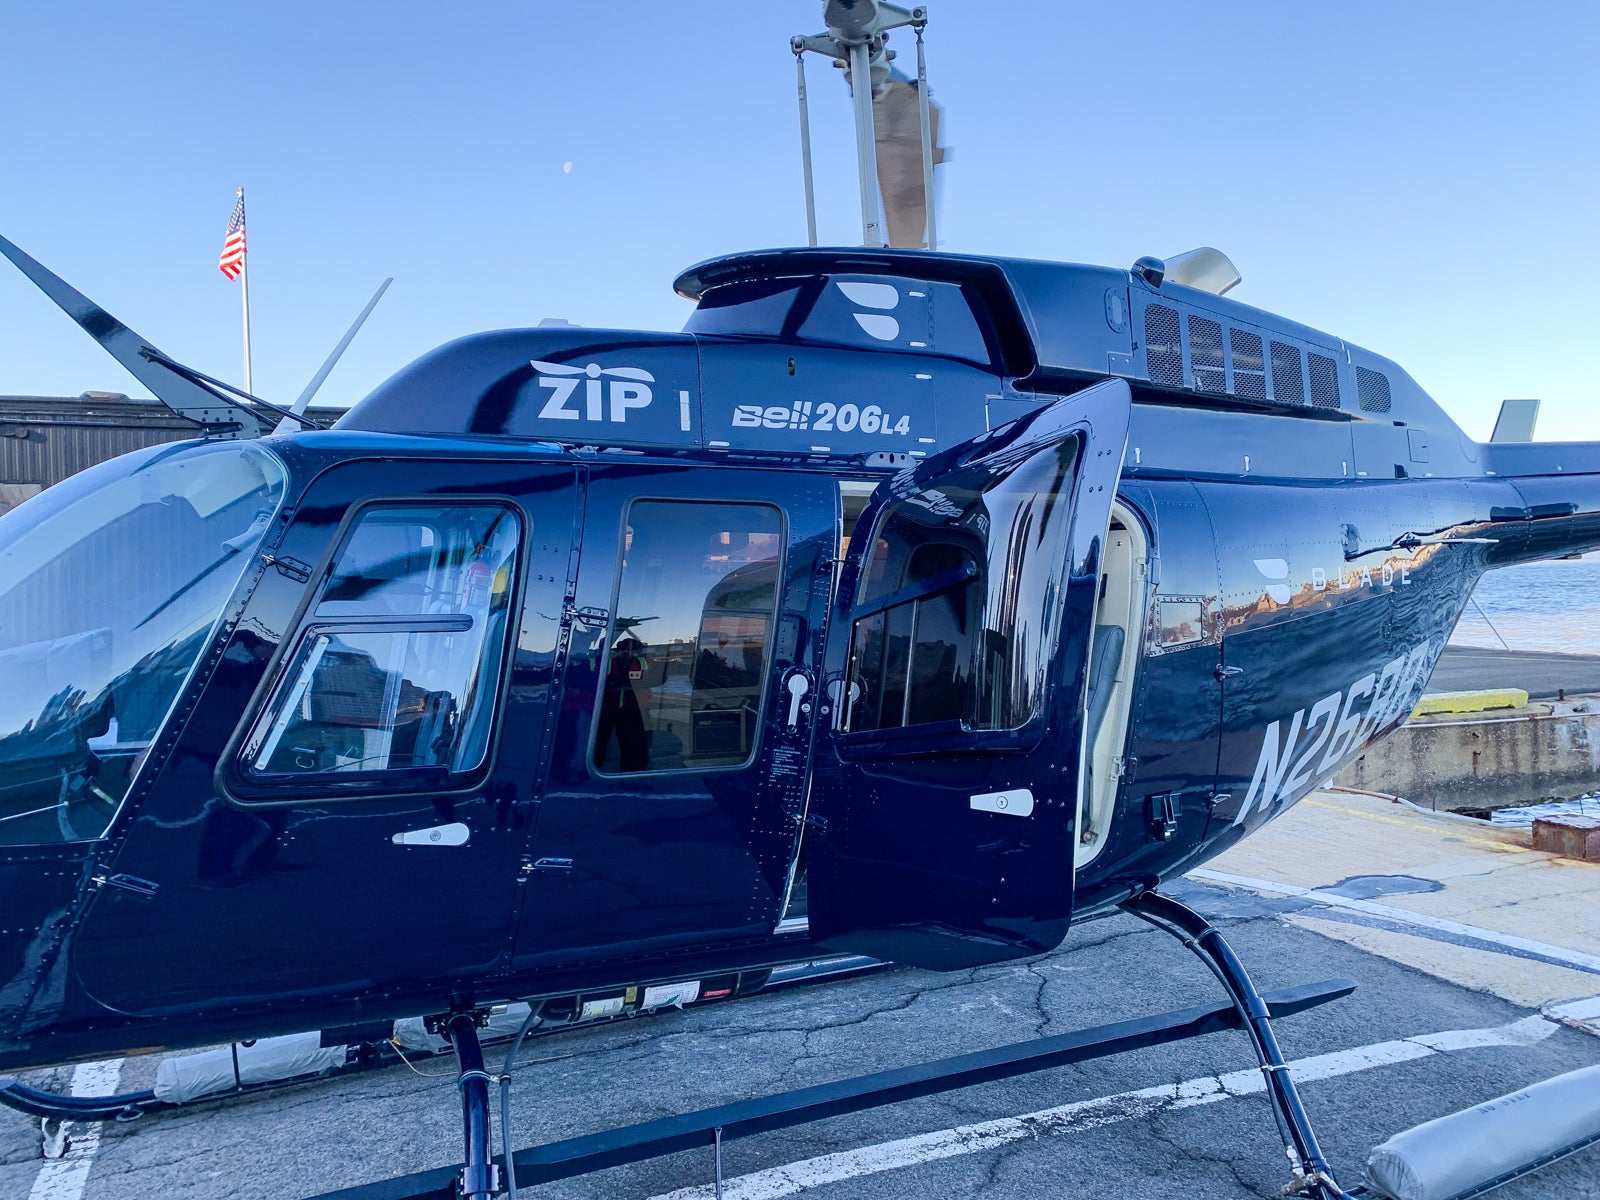 JetBlue flyers can earn free Blade helicopter trip with Mint ticket